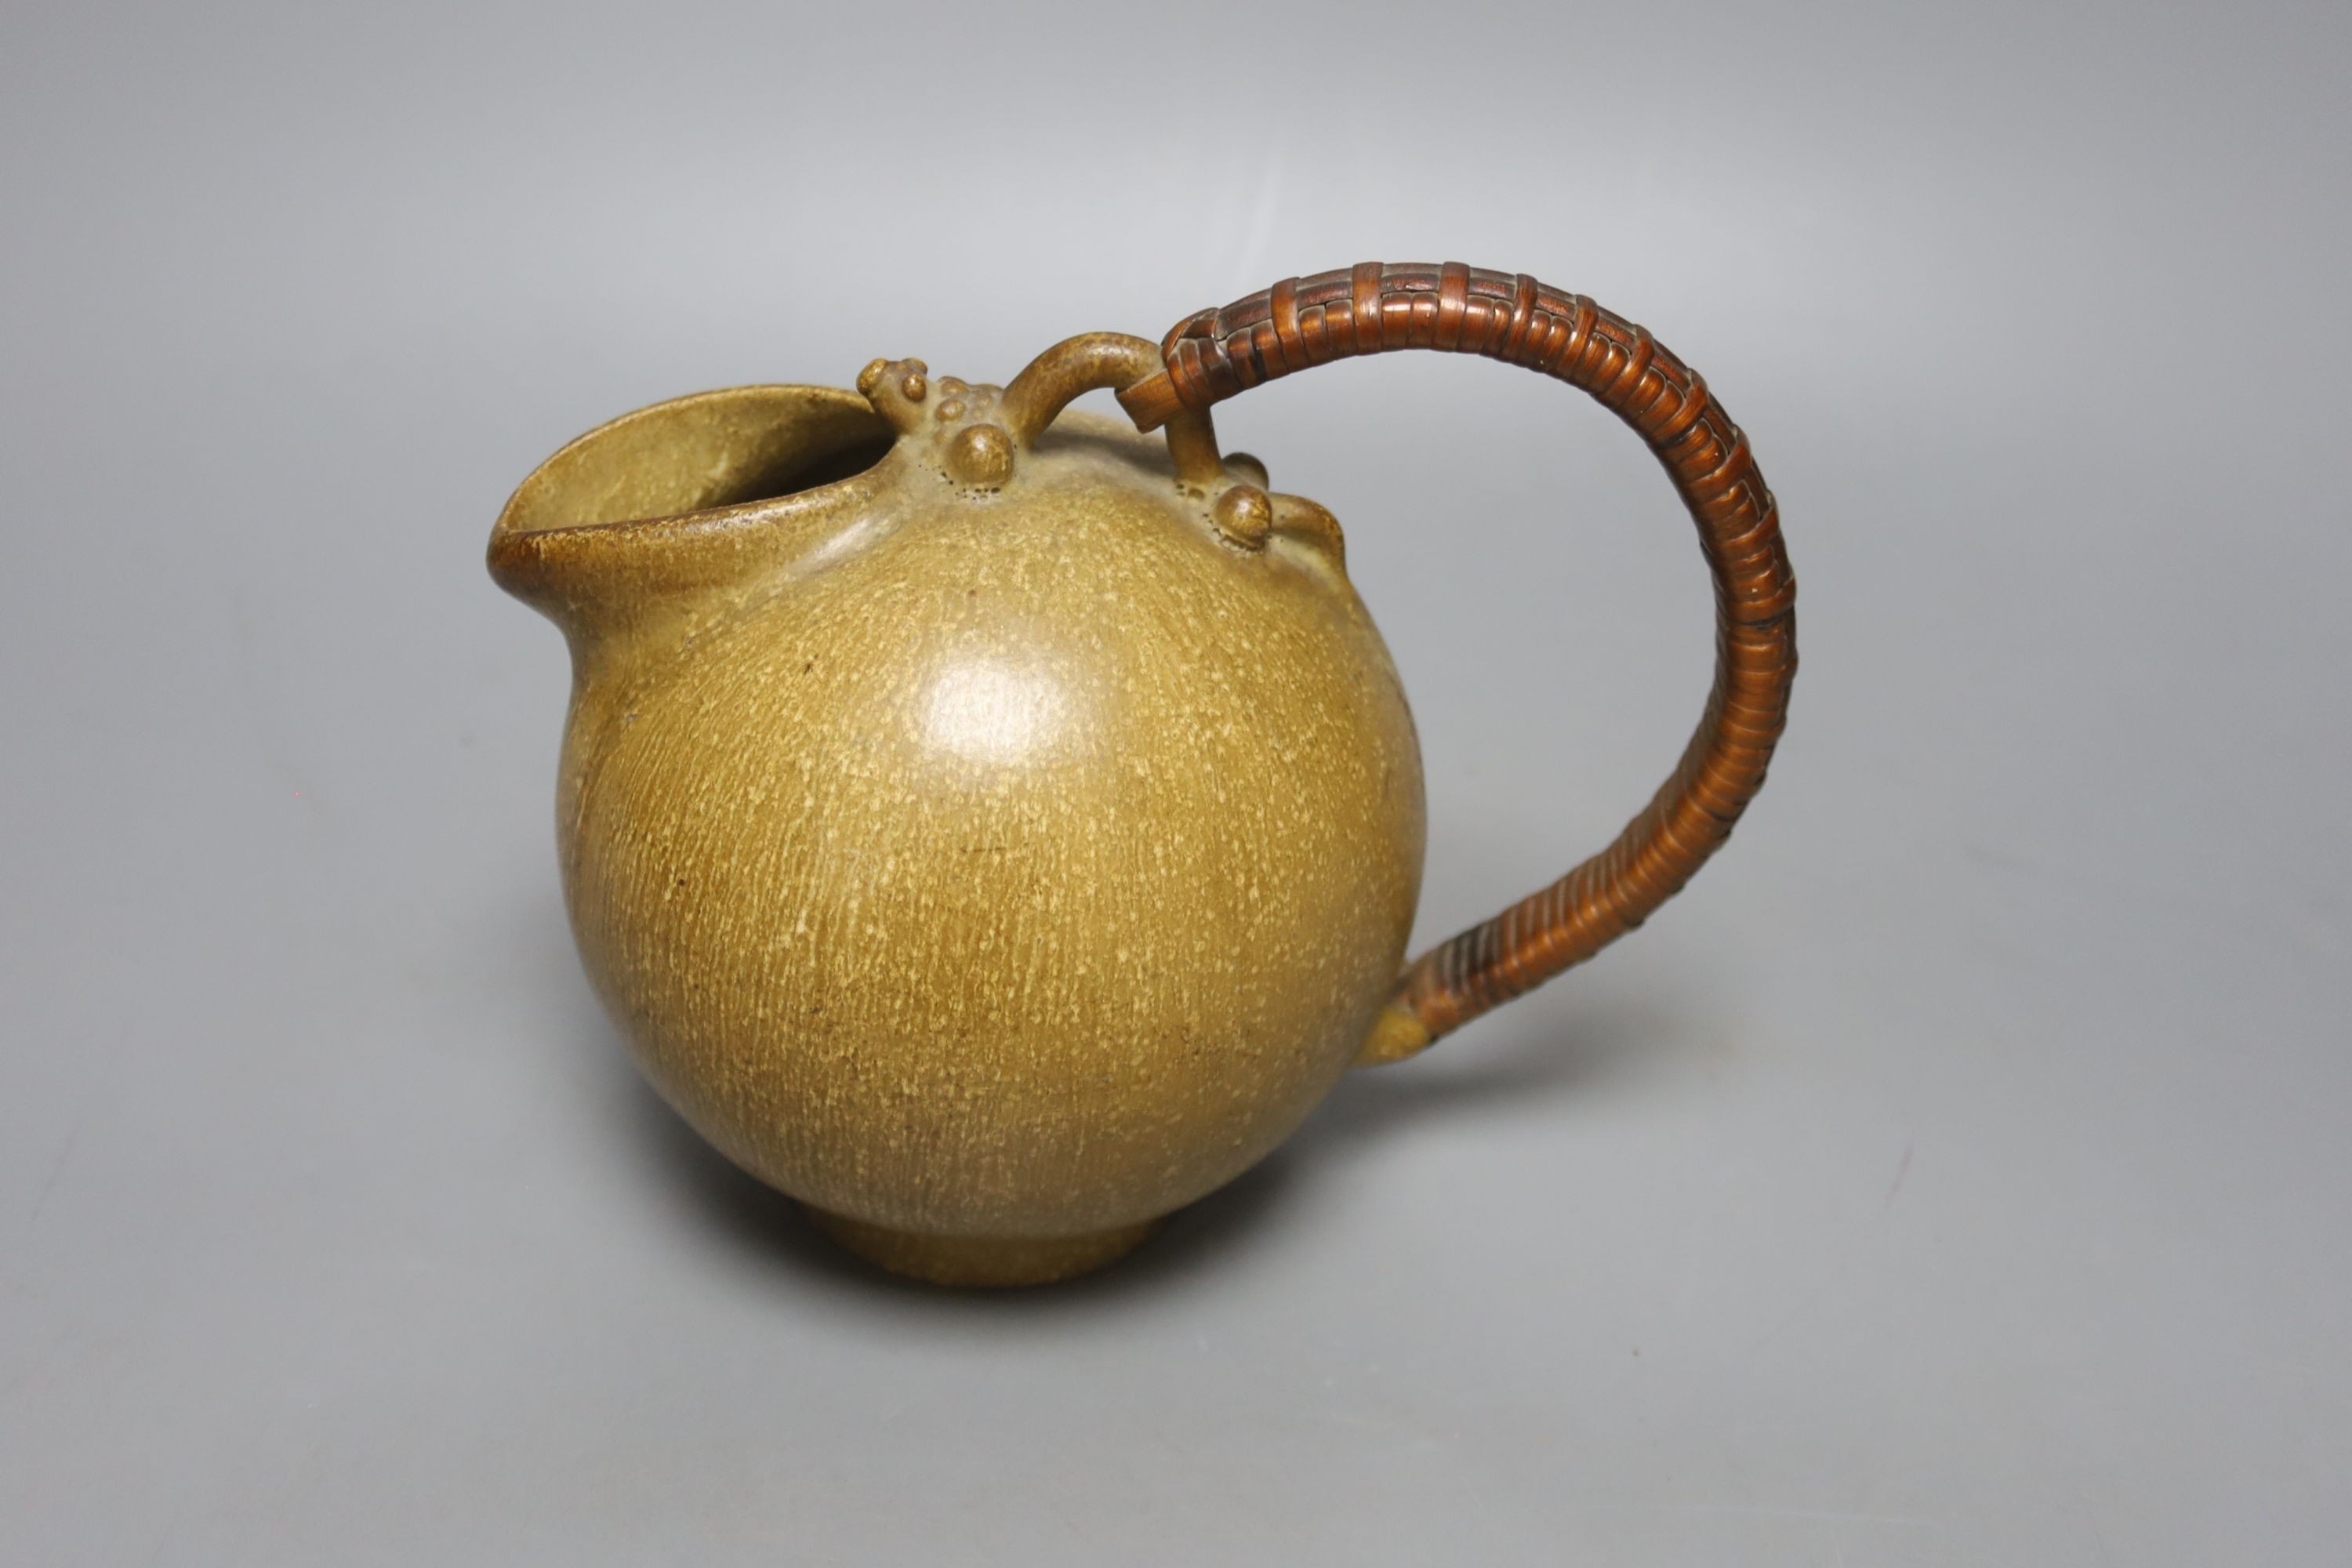 Art Pottery ewer, initials AM, numbered 151 on base, 19 cms wide, including handle.